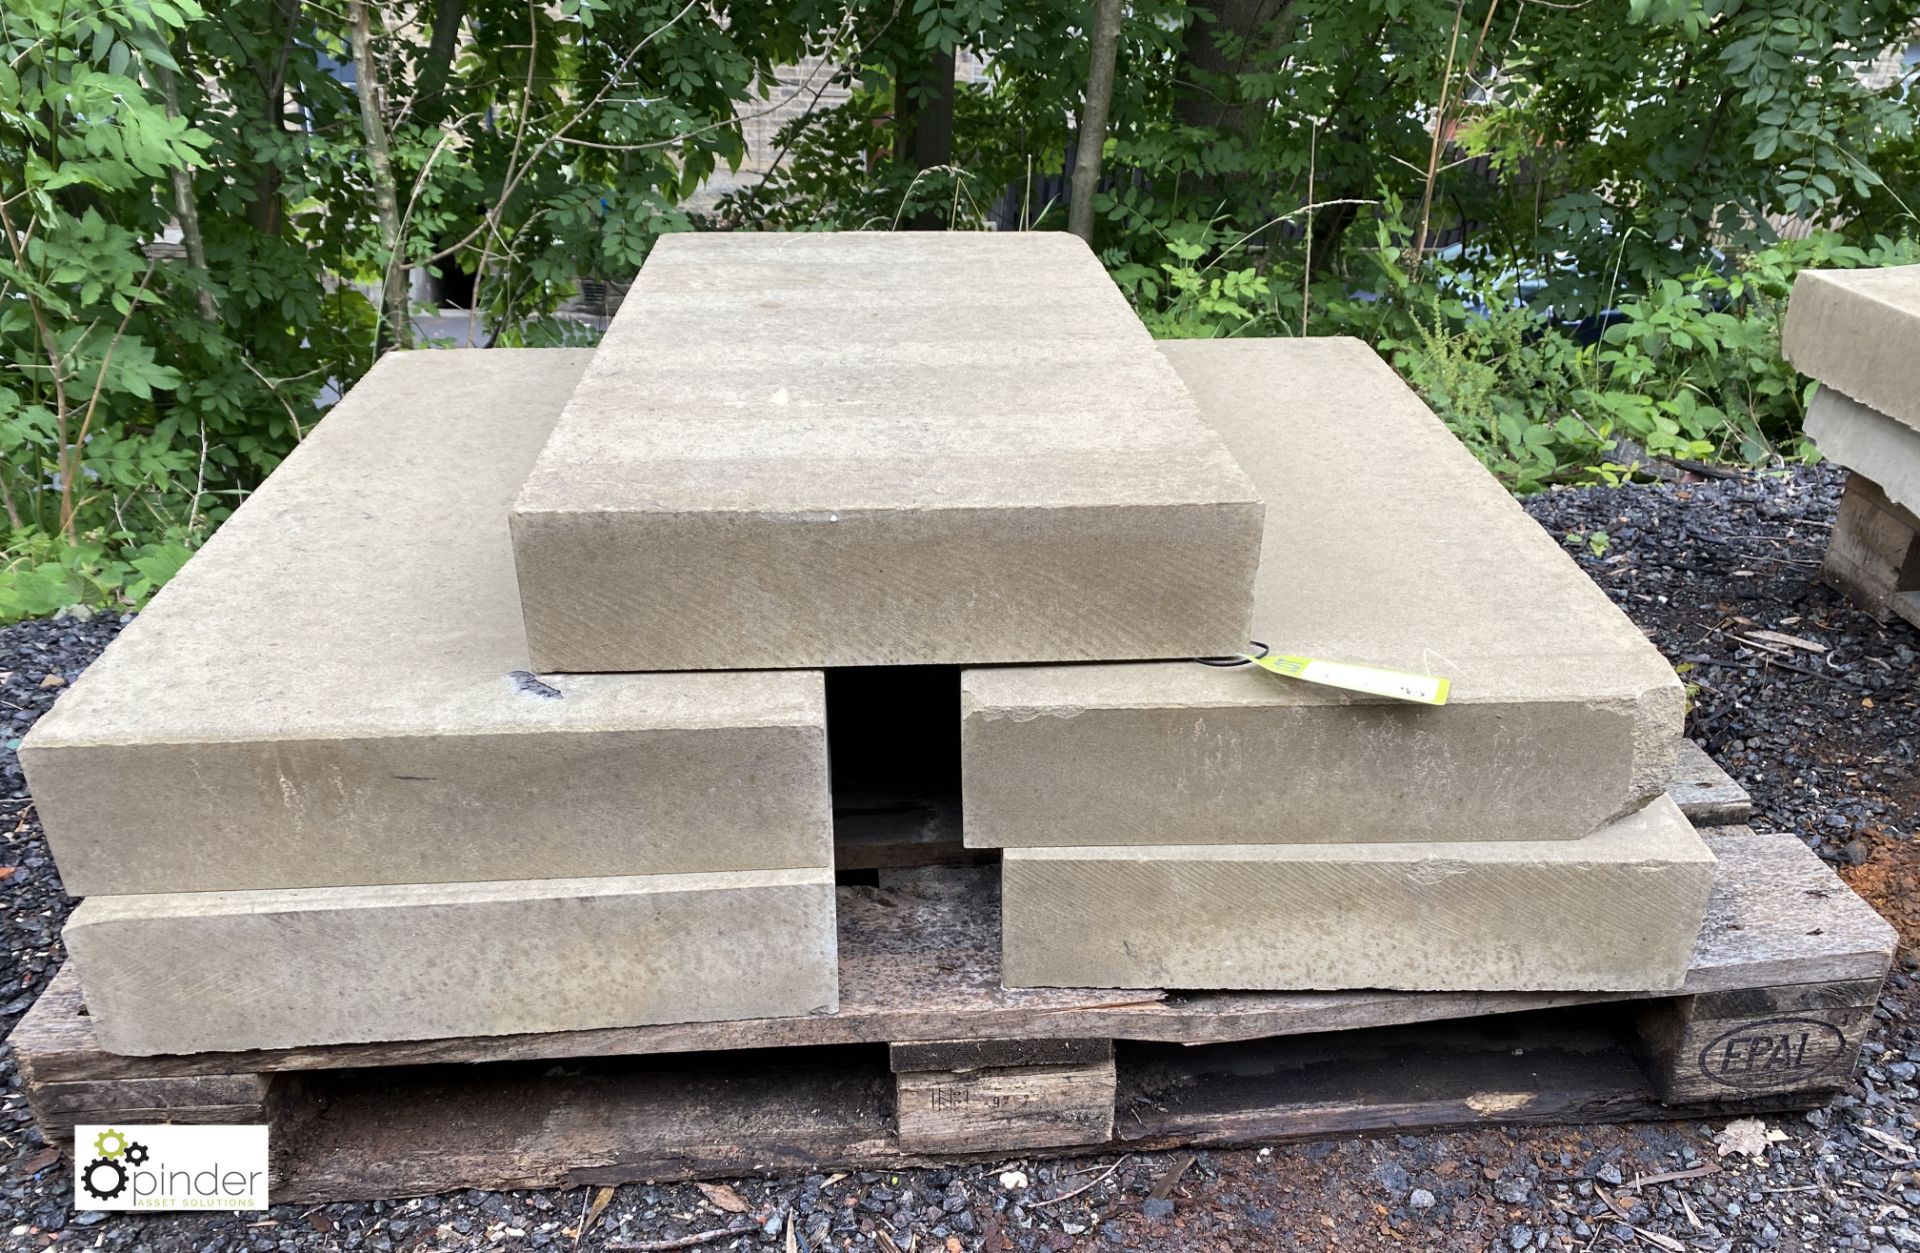 5 Yorkshire stone Quoin Slabs, approx. 800mm x 430mm x 105mm, to pallet (LOCATION: Woodhead Road) - Image 3 of 3